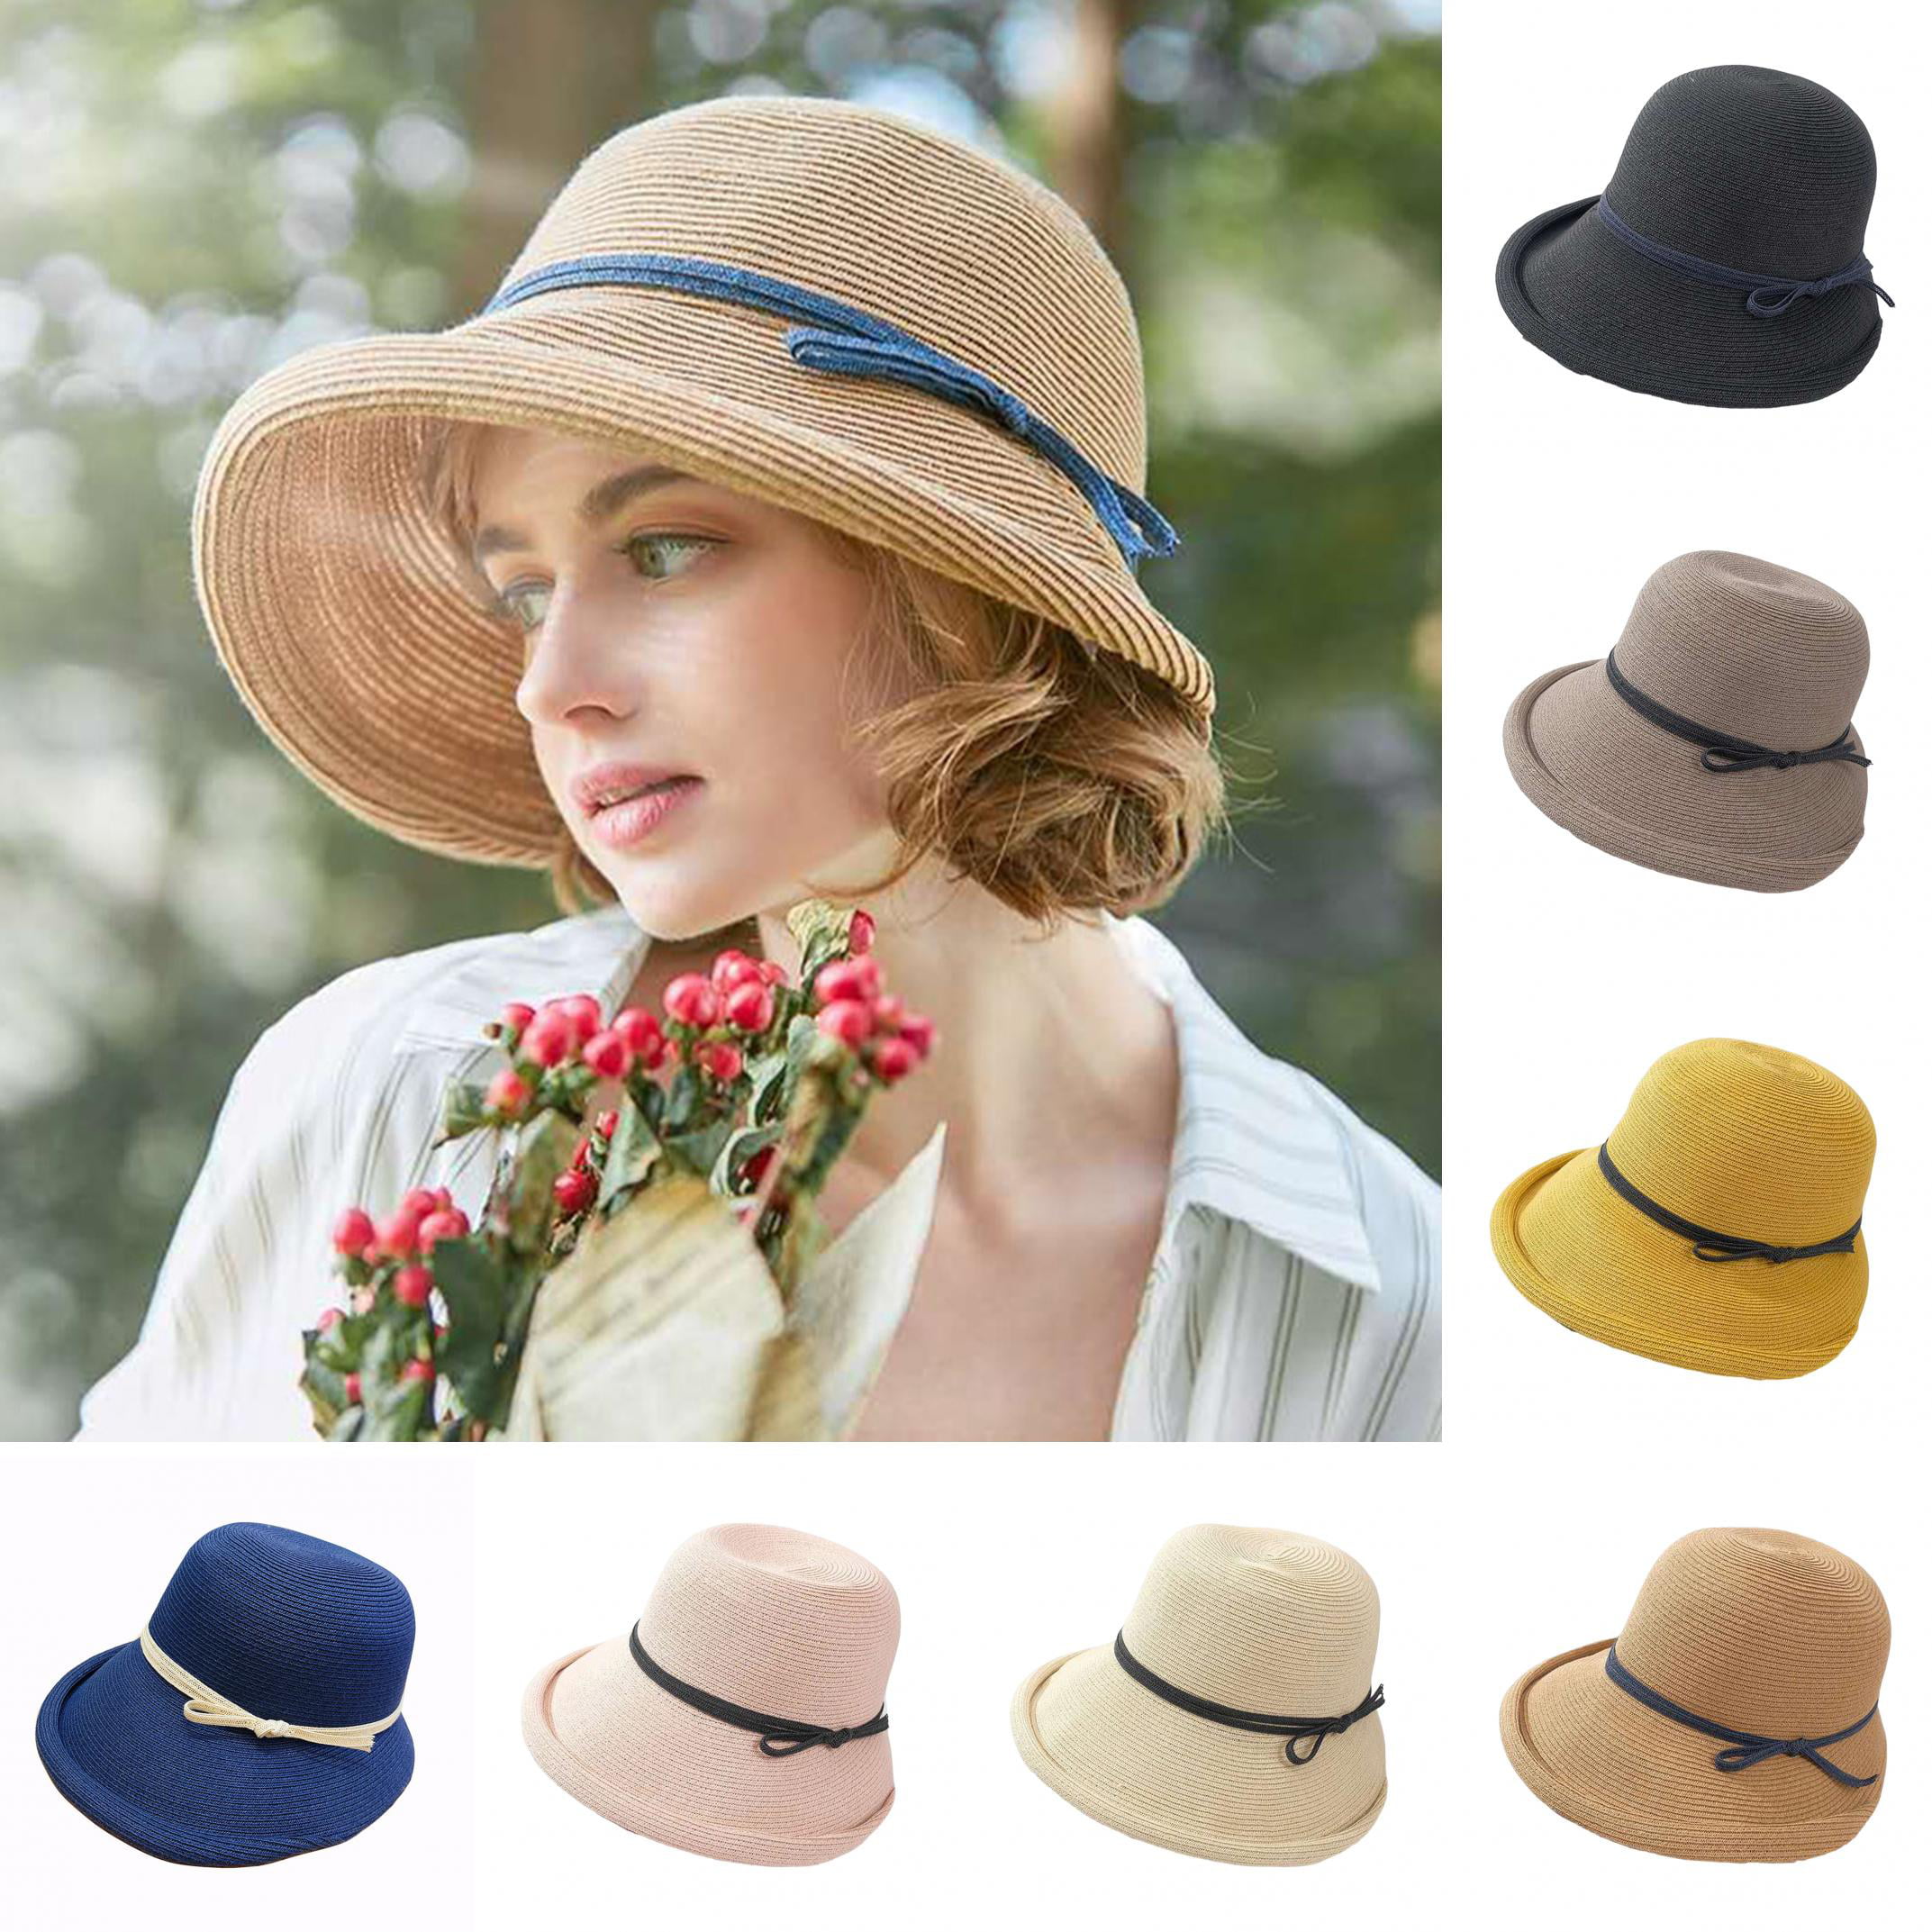 Shenmeida Sun Hats for Women UV Protection Wide Brim Foldable Curled Edge  Straw Beach Fisherman Hat